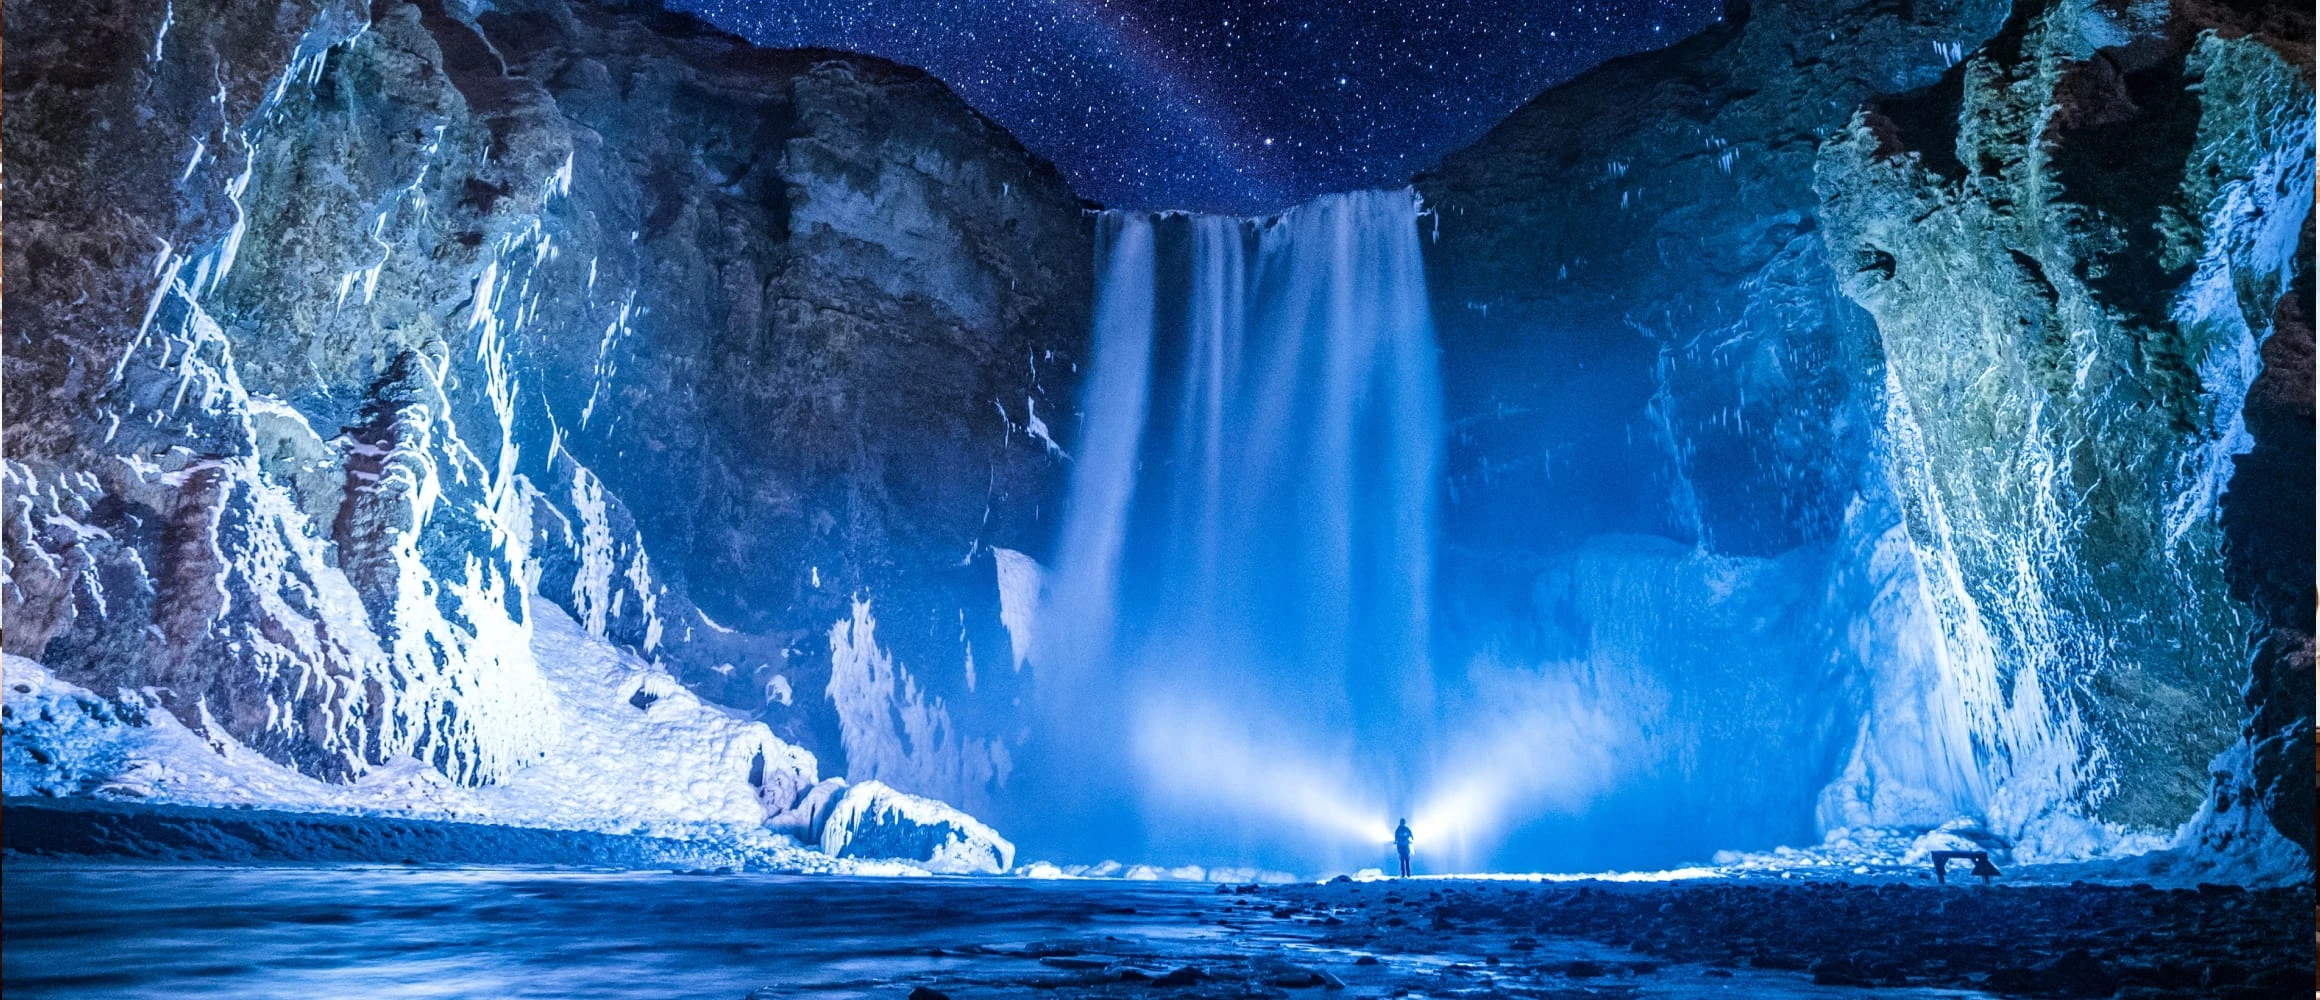 Person in front of waterfalls during night time